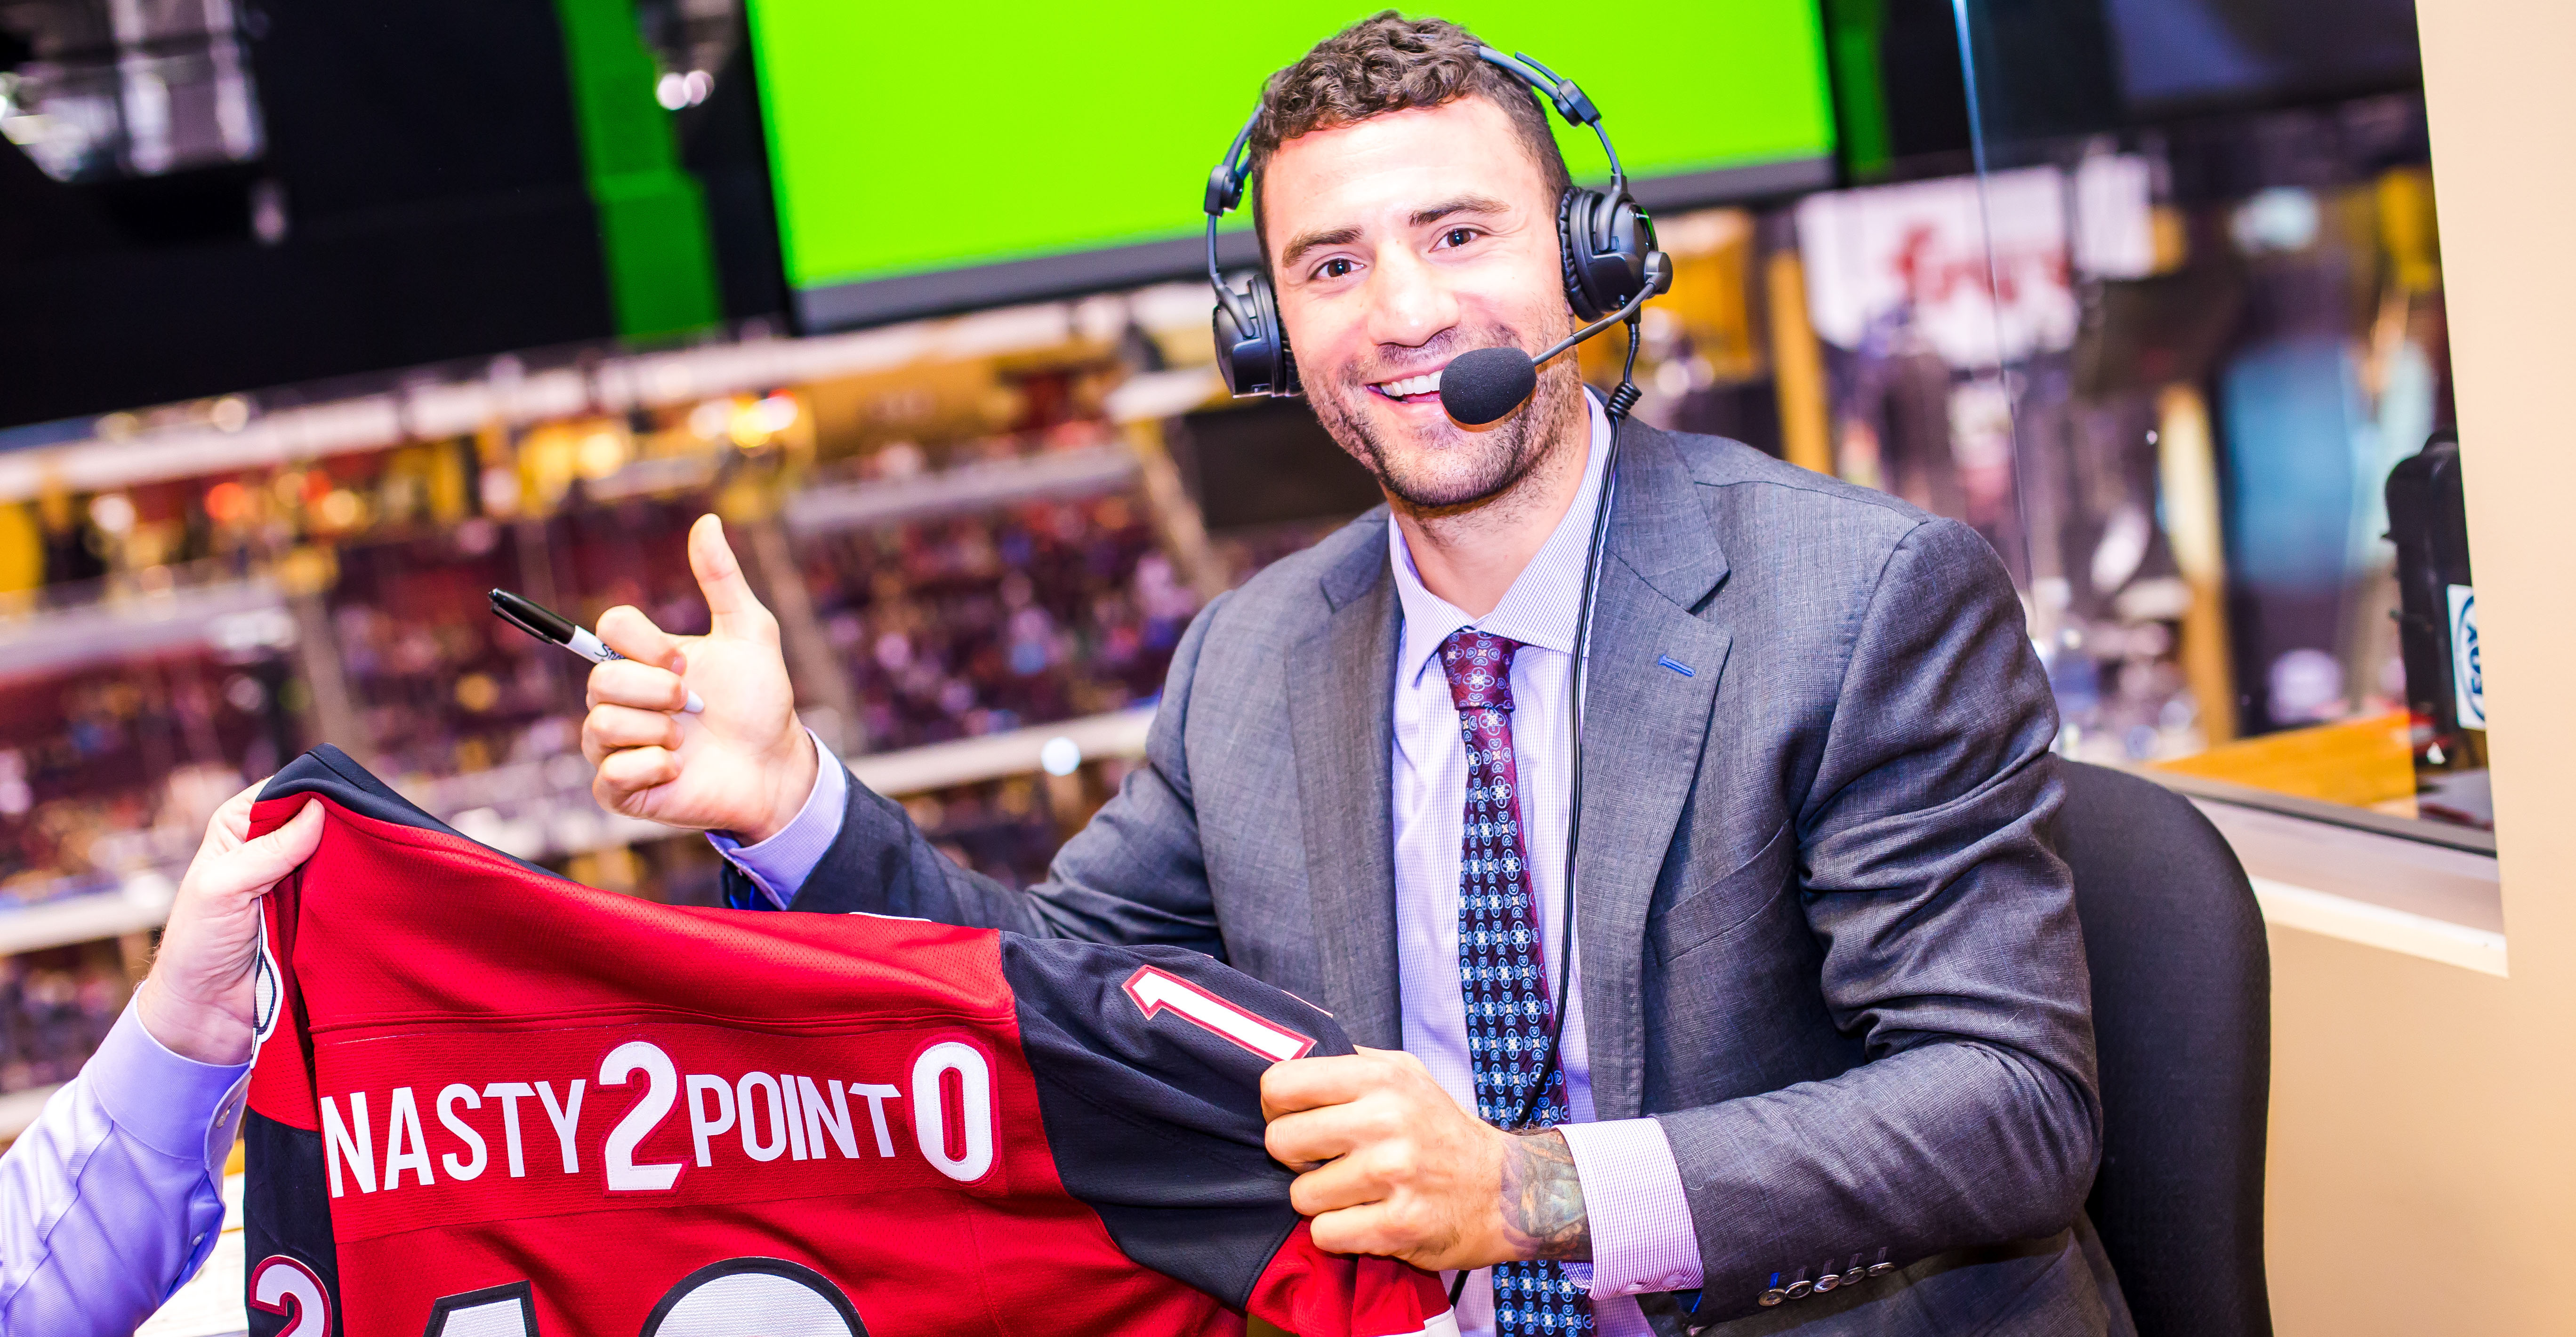 Coyotes broadcaster Paul Bissonnette's example for post-hockey living isn't  lost on Wild players